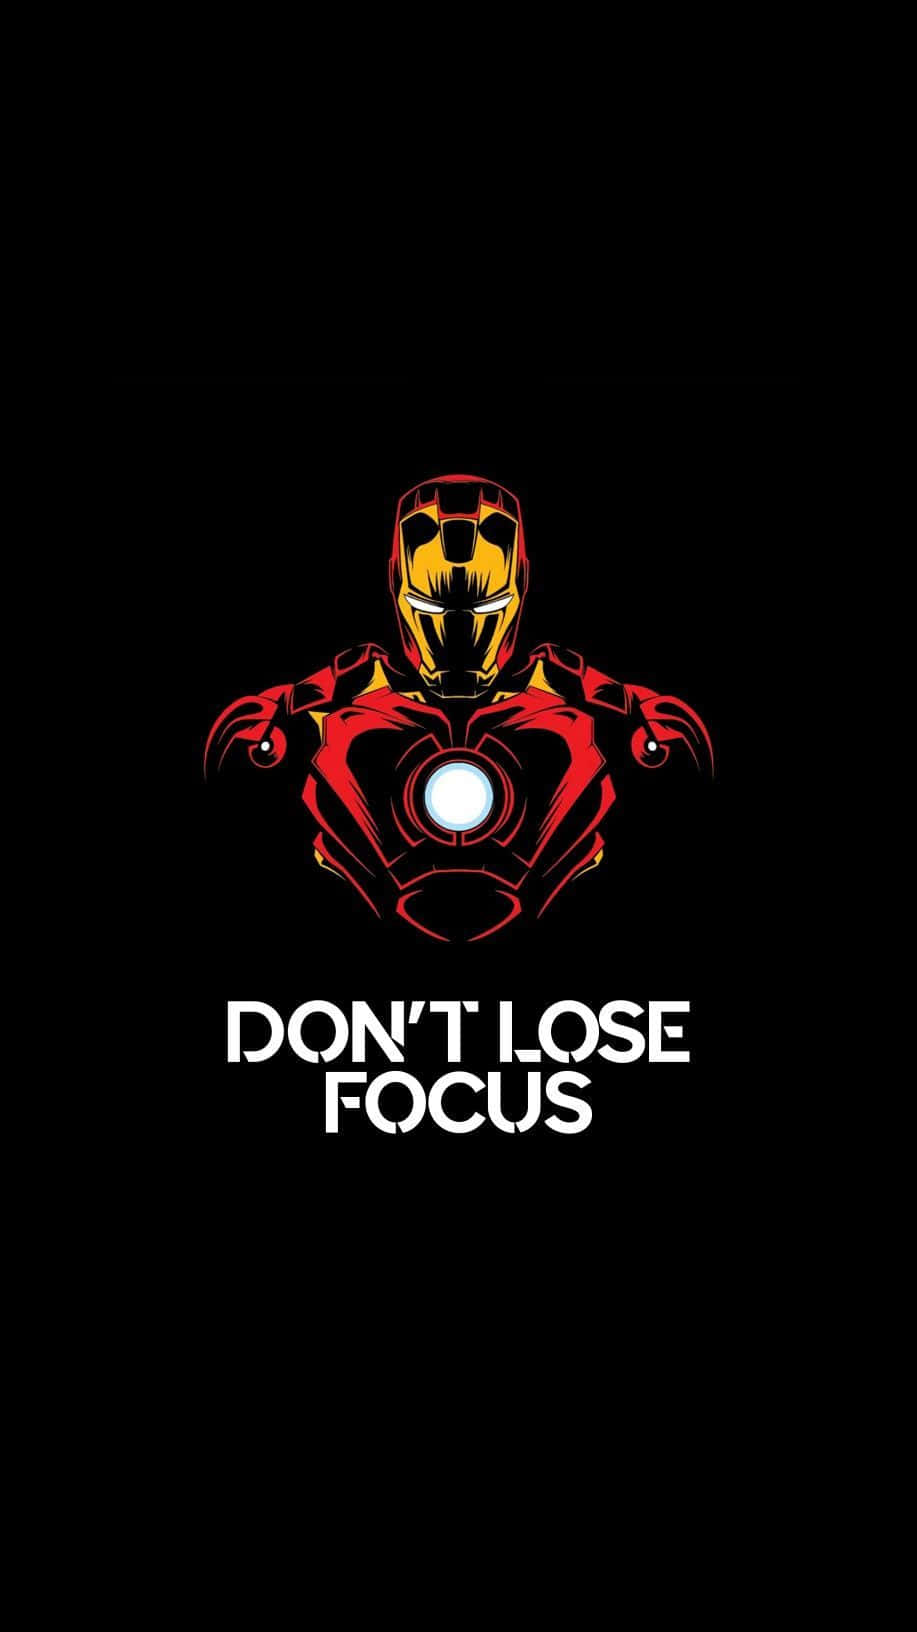 "My armor was never a distraction or a hobby, it was a cocoon, and now I'm a changed man." - Tony Stark, Iron Man Wallpaper